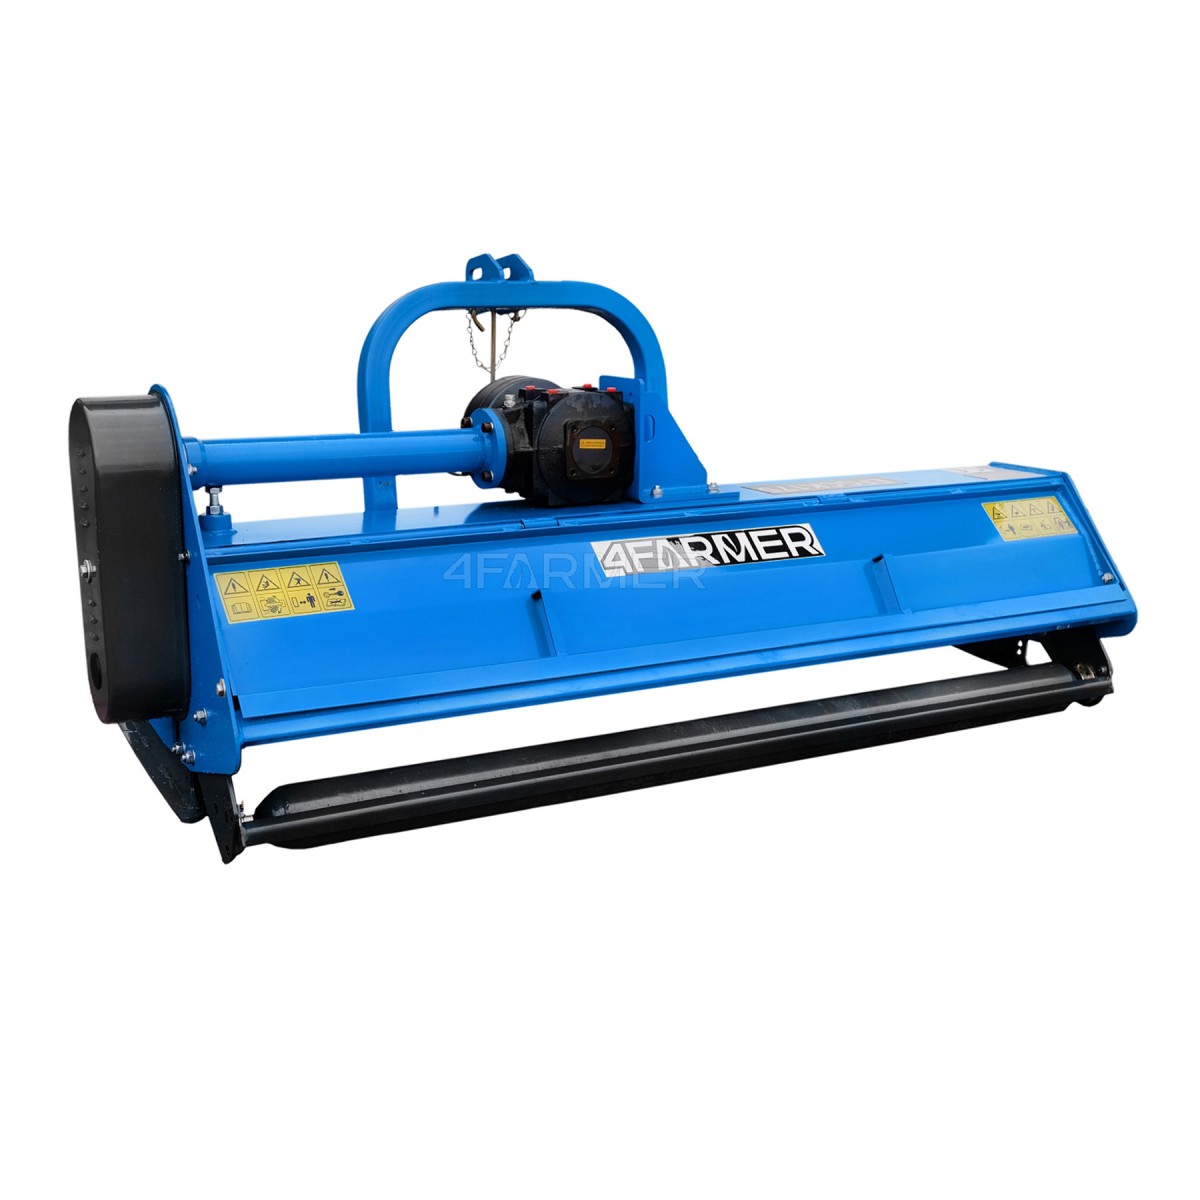 EFGC-K 165 flail mower with opening flap 4FARMER - blue